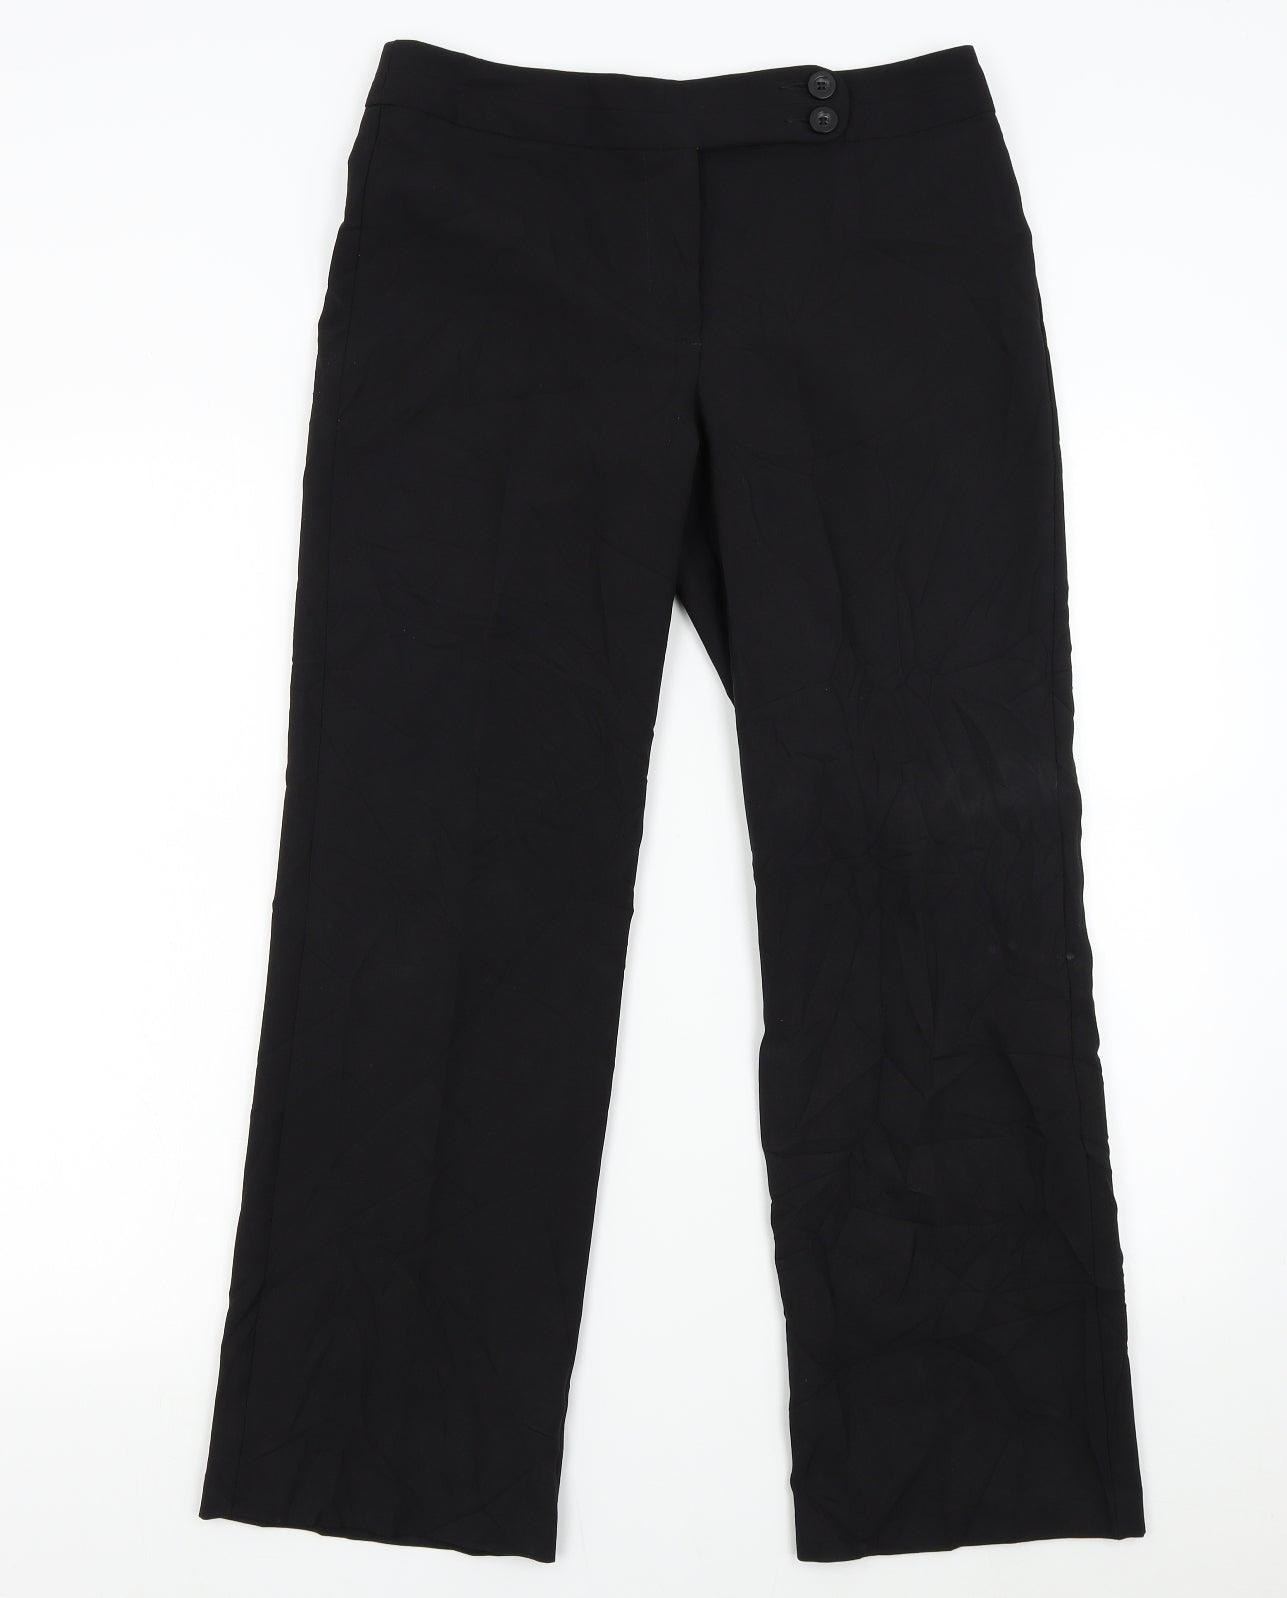 George Black Straight Leg Trousers With Stretch Size 12 Calais Work Office  Chic  eBay